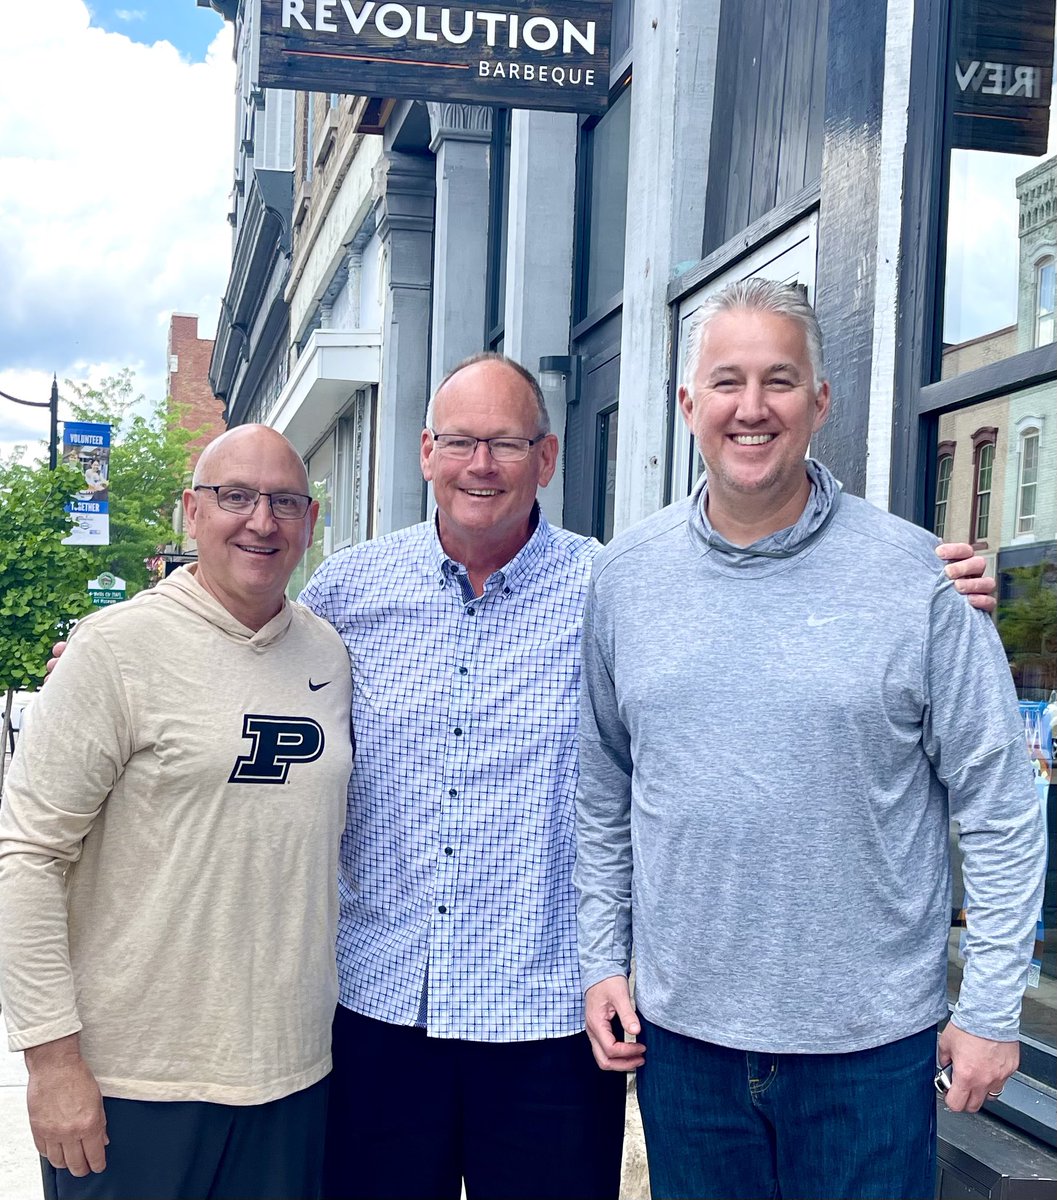 Great lunch today at the Revolution Barbeque in downtown Lafayette. I was joined by a couple of outstanding storytellers - former Purdue Swim Coach Dan Ross & @CoachPainter. A few days before @PurdueVB departs for foreign trip to Istanbul, it was great fellowship.